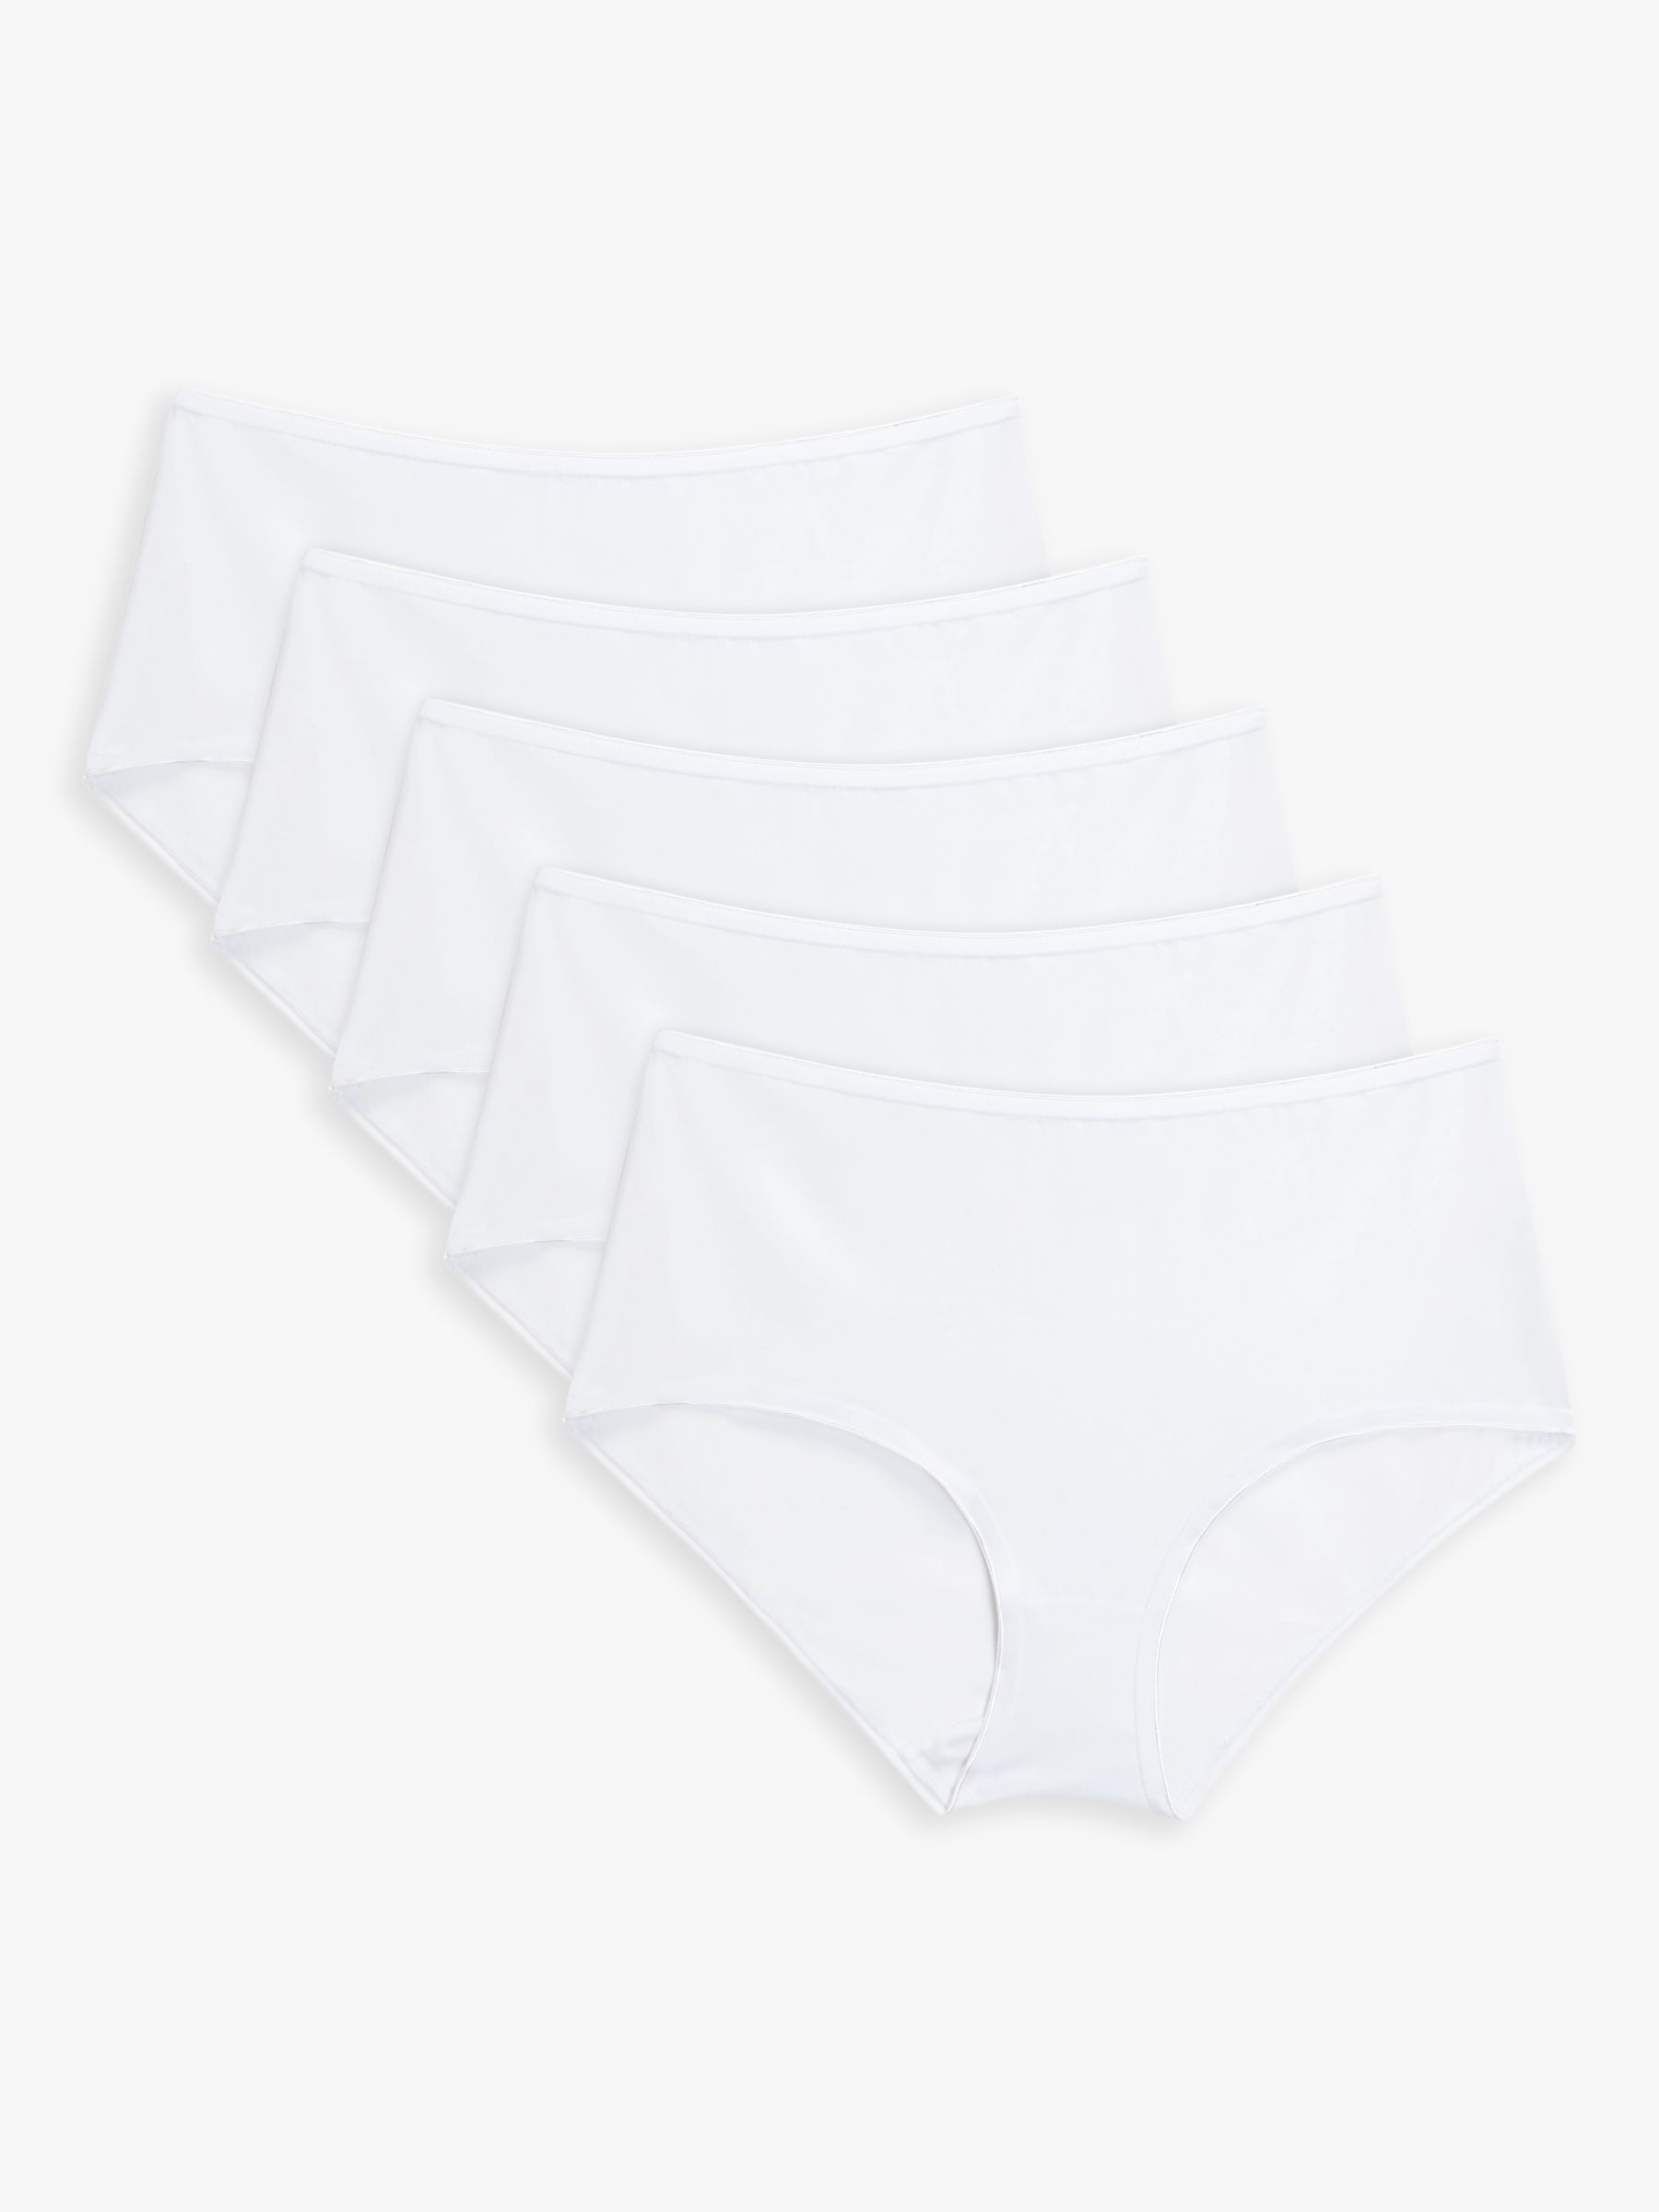 John Lewis ANYDAY Cotton Full Briefs, Pack of 5, White at John Lewis ...